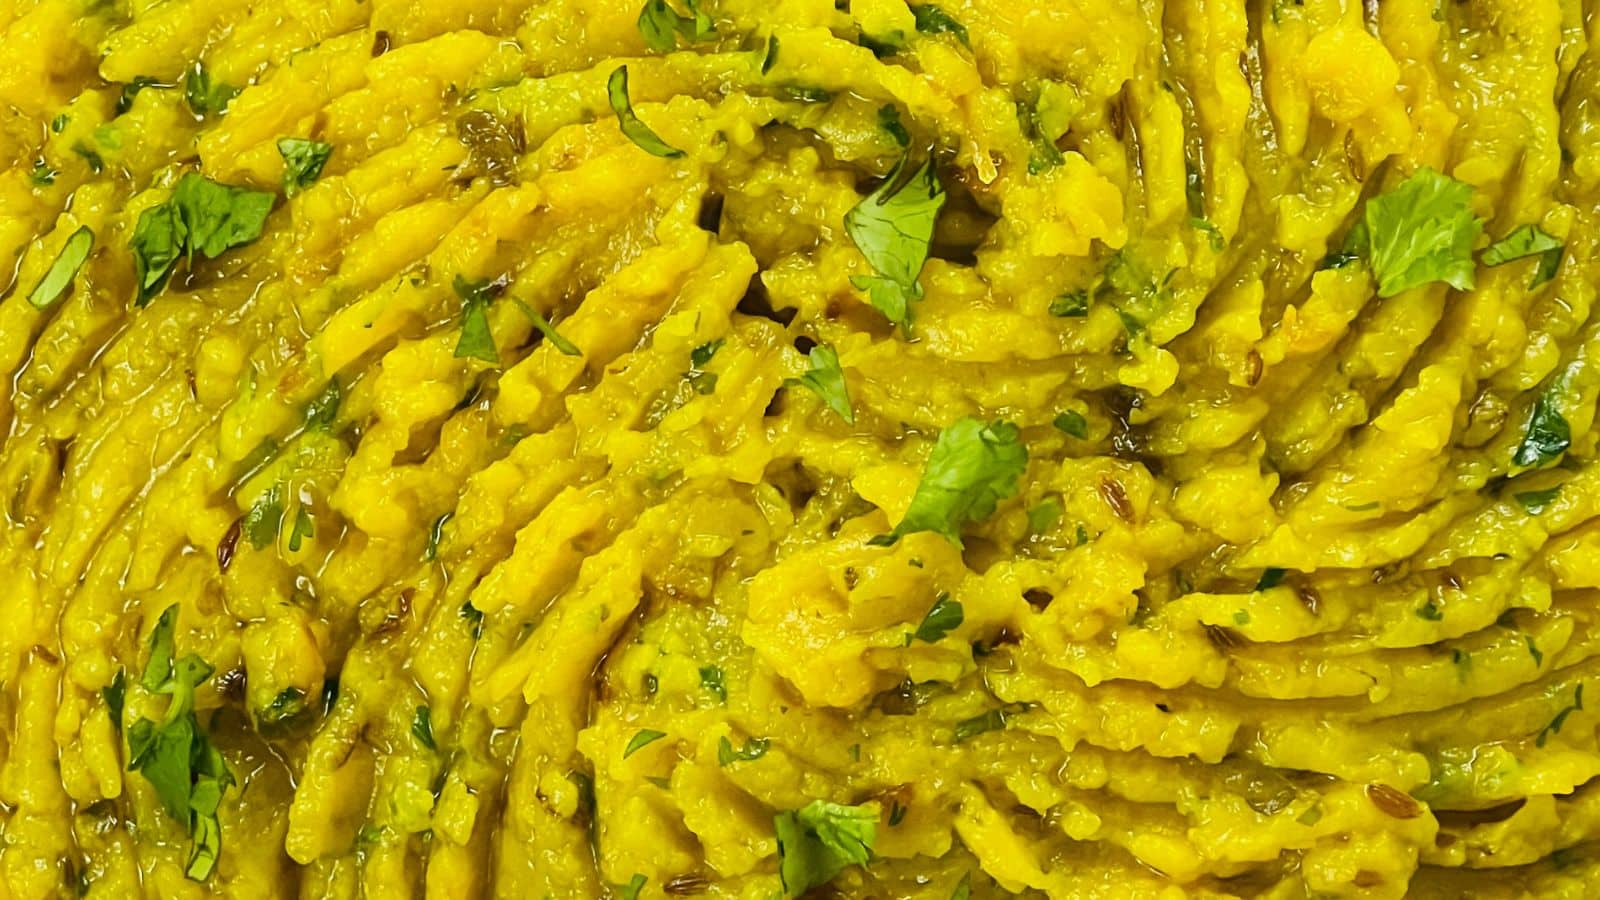 Close-up of Masala Mashed Potatoes garnished with herbs.